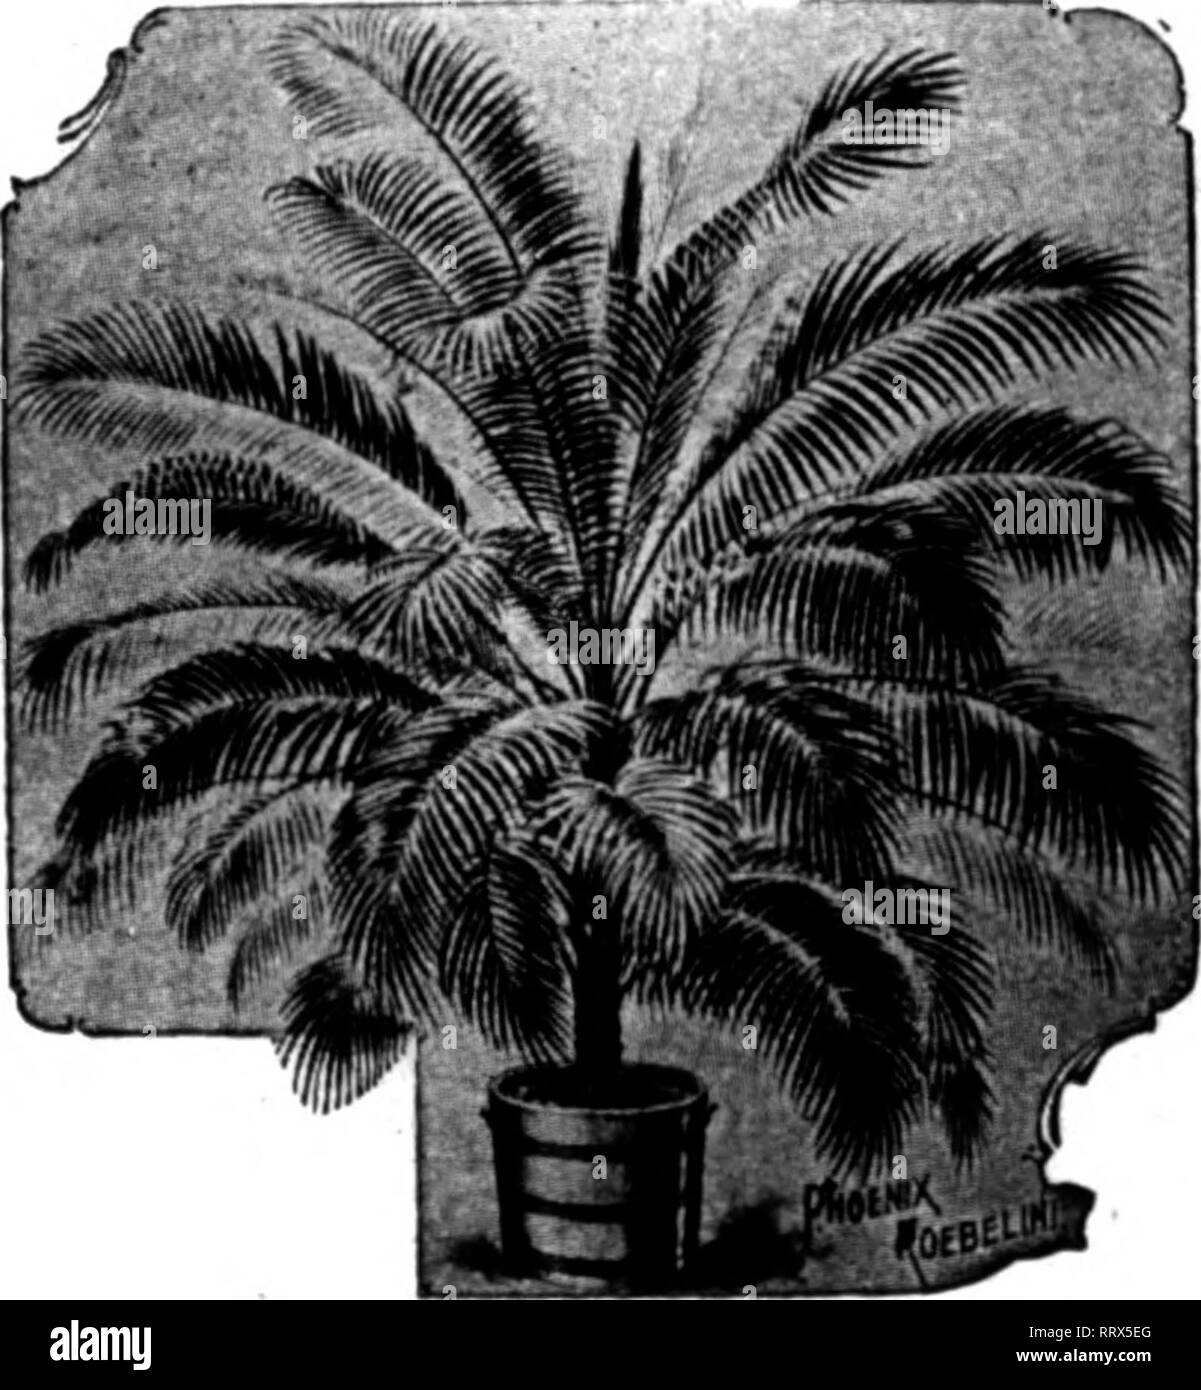 . Florists' review [microform]. Floriculture. Araucaria Excelsa Good strong stock, 6-inch, 60c each; 4 to 5 tiers, 75c and $1.00 each. Christmas and New Clus- ter Peppers Finely fruited. 4-lnch 25c each; $2.50 per doz. 5-lnch 60c each; 6.00 per doz. Pandanus Veitchii Fine colored stock. 5-lnch $0.75 each; $9.00 per dos. 6-inch 1.50 each; 18.00 per dos. 7-lnch 2.00 each; 24,00 per doi. 7-lnch, strongr 2JS0 each. Dracaena Terminalis Fine color. 4-lnch 25c each; $2.50 per doz. 5-inch 60c each; 6.00 per dos. Dracaena Massangeana 6-inch, strong, well colored... .$1.25 to $1.60 each Ficus Pandurata  Stock Photo